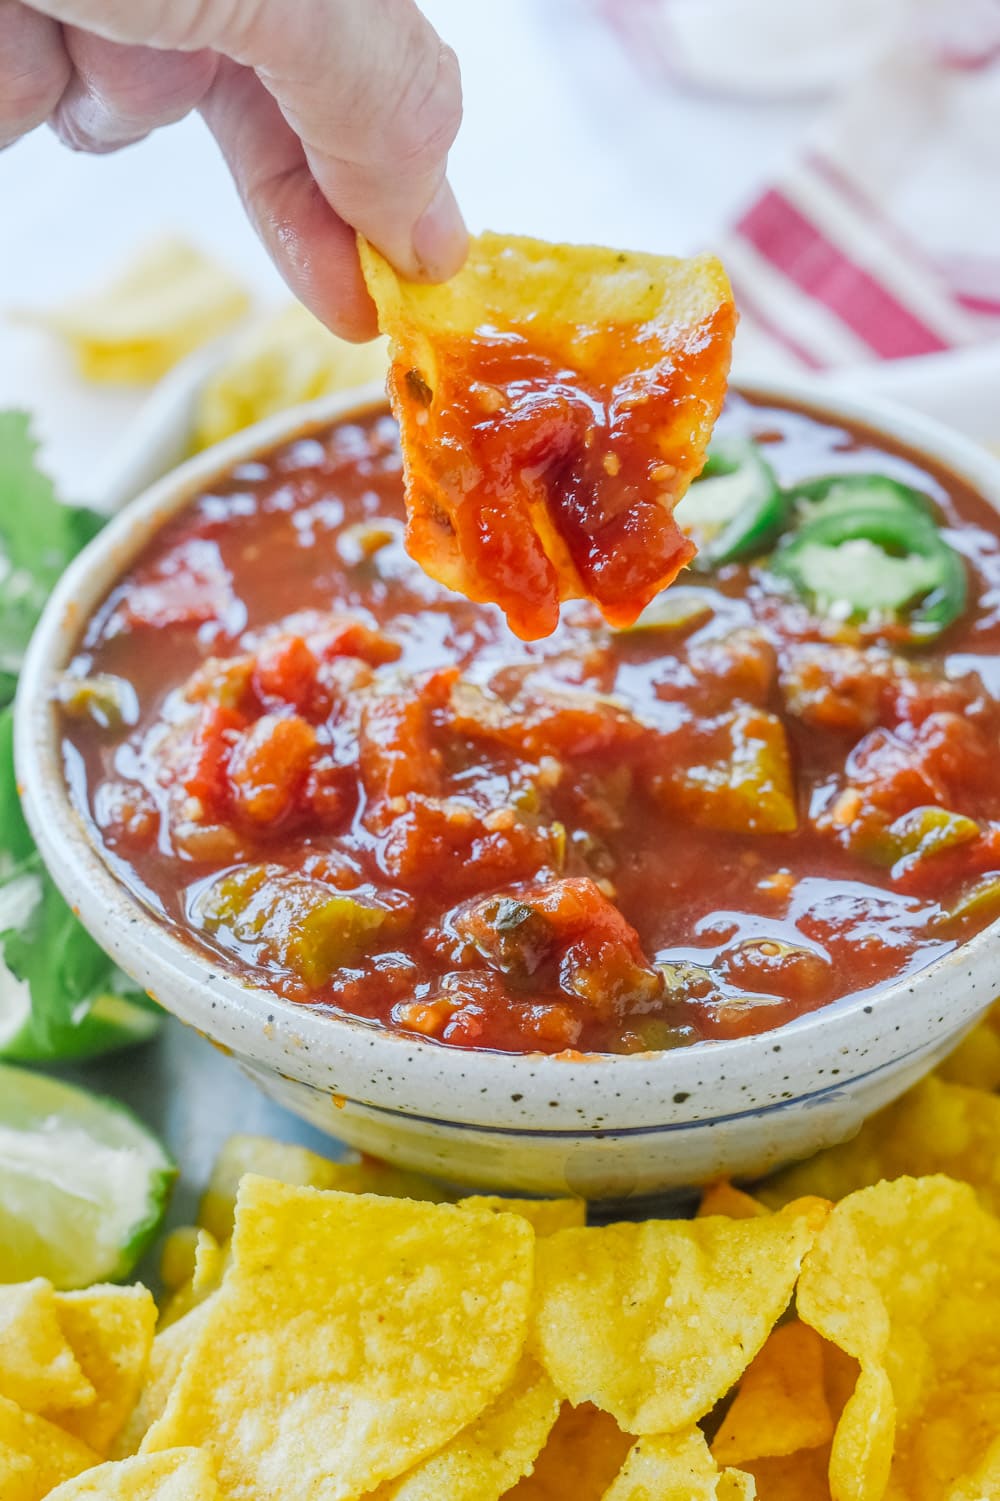 Dipping chip into salsa